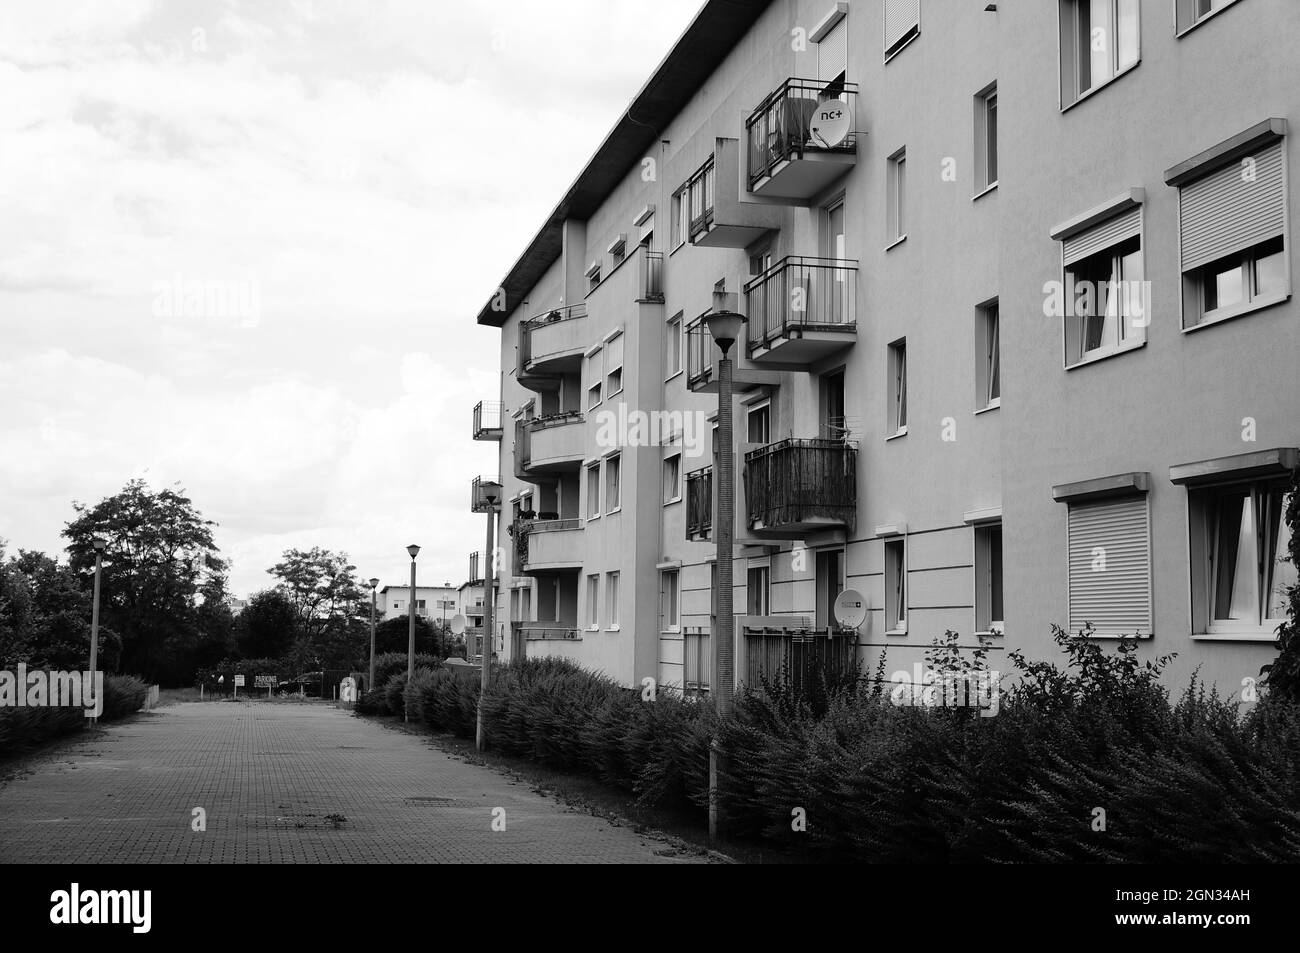 POZNAN, POLAND - Jun 10, 2017: A grayscale of a four storey apartment building in the  Stare Zegrze district Stock Photo